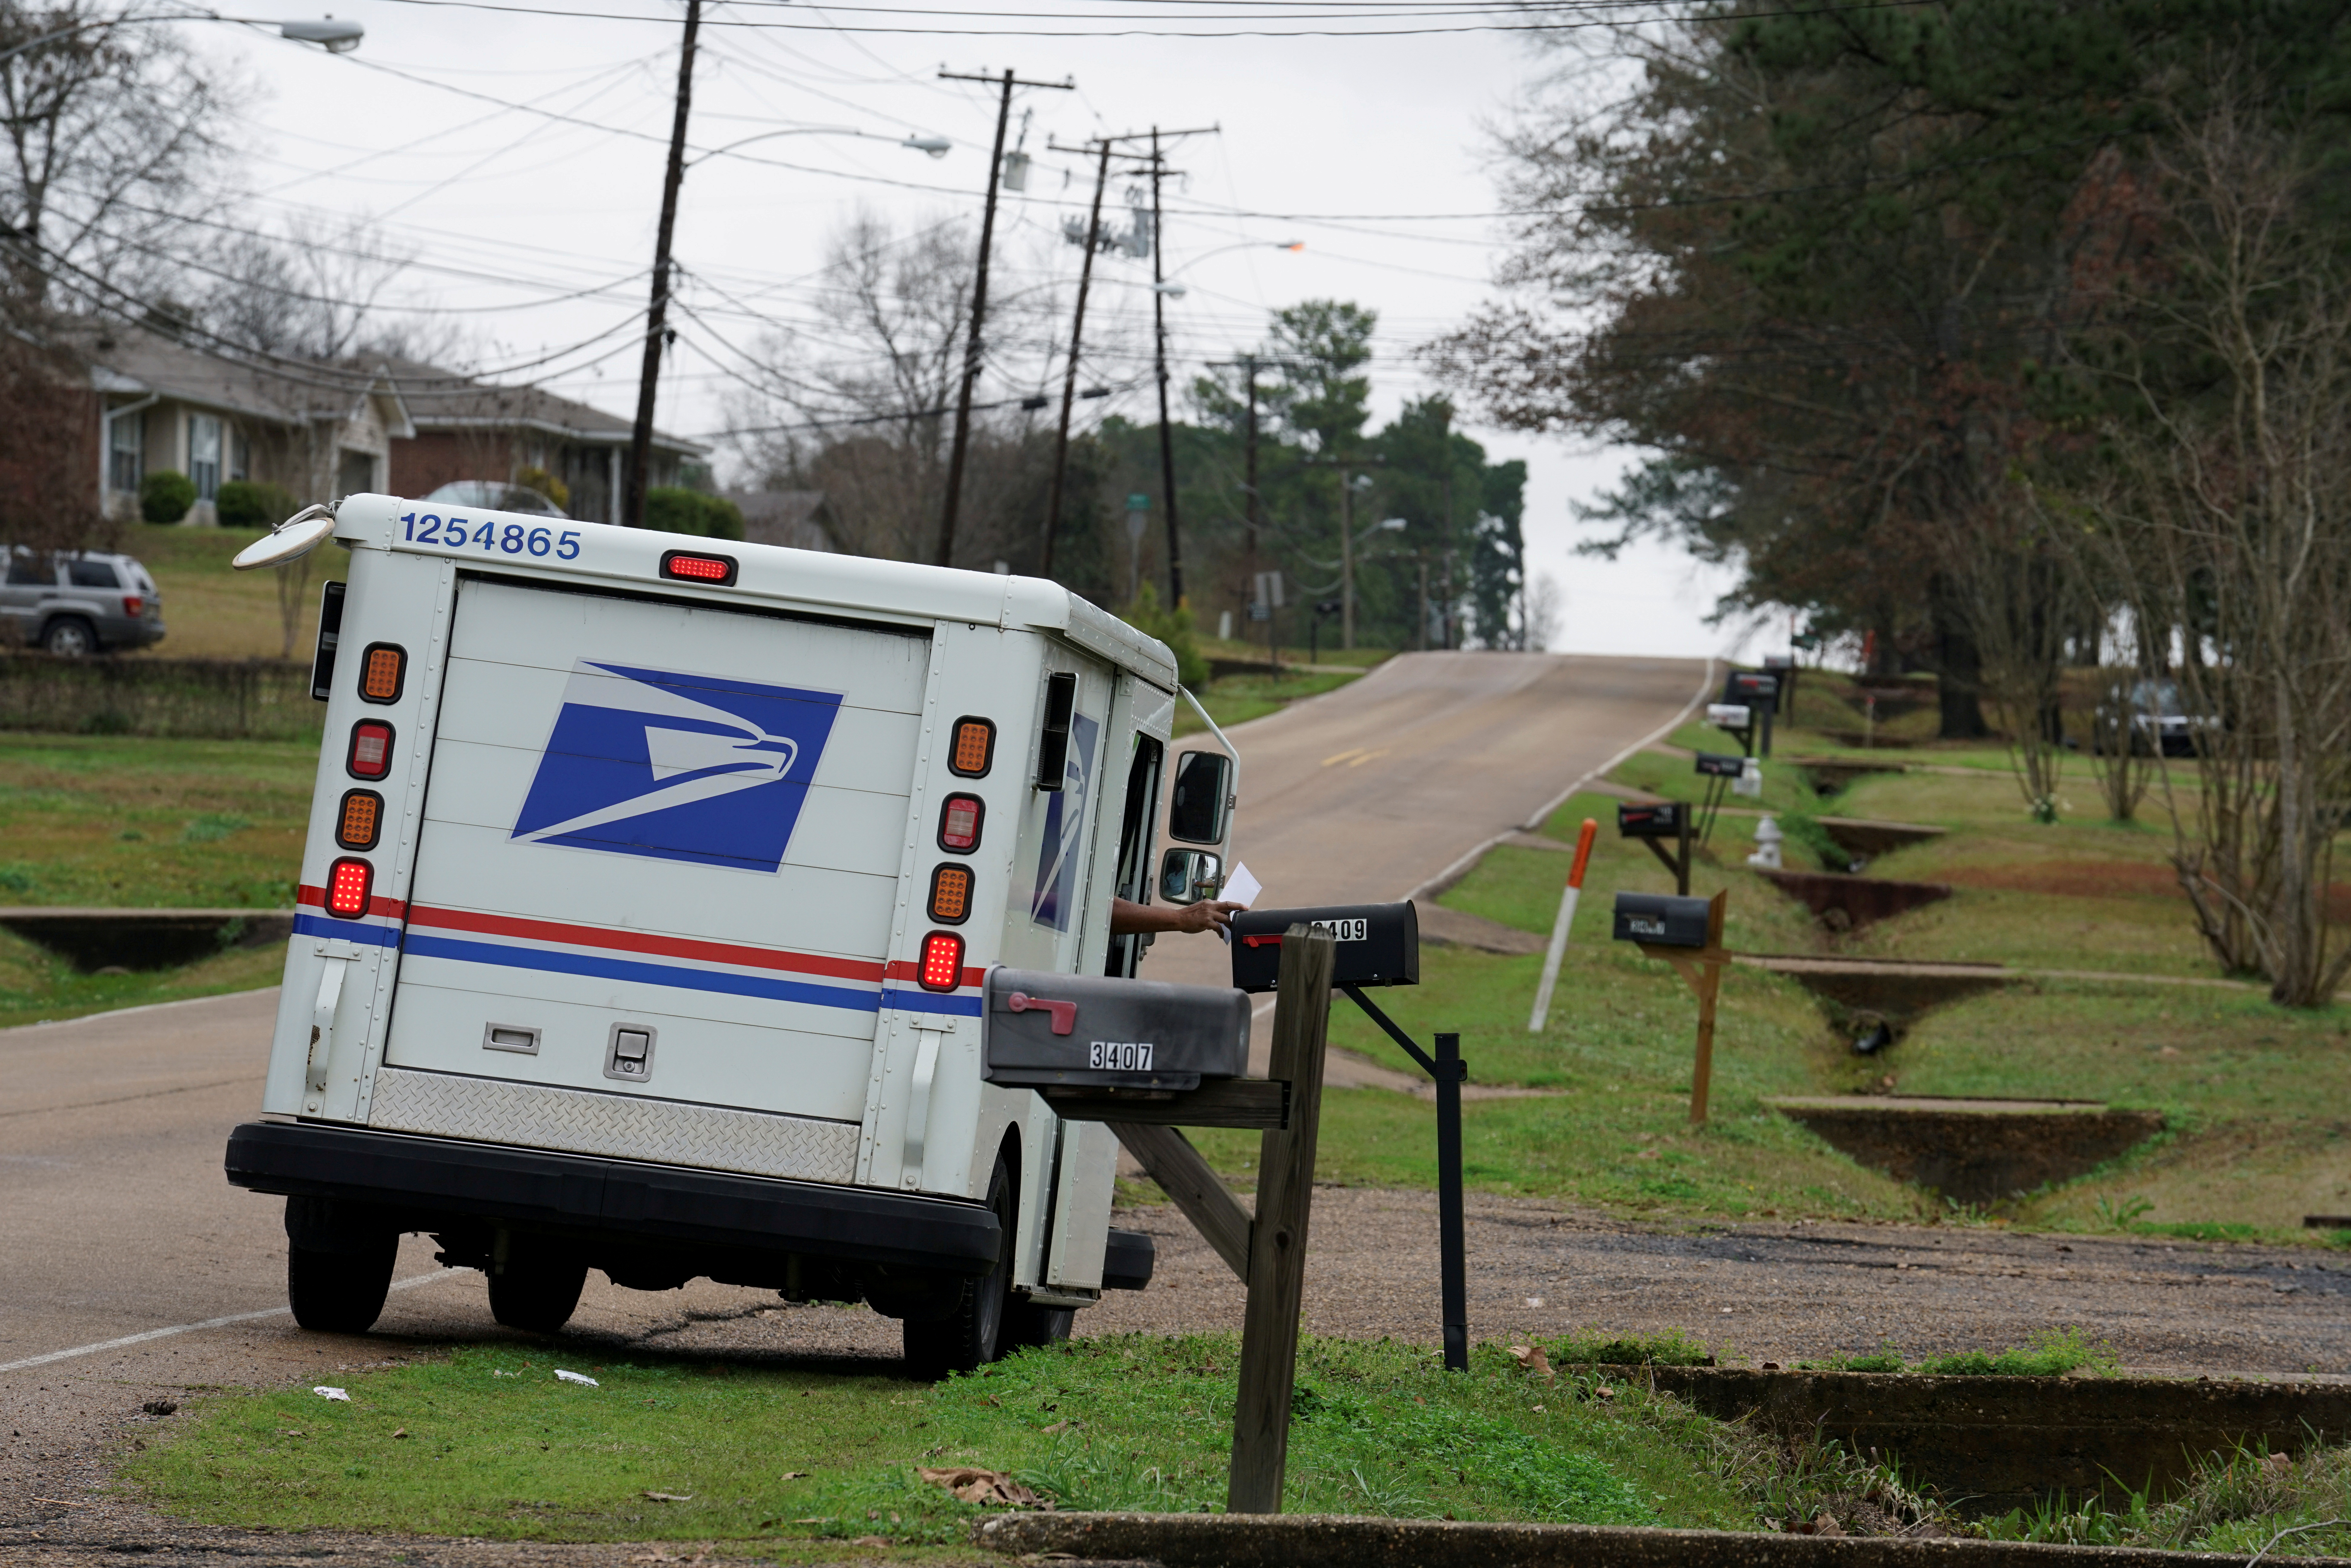 A mail carrier delivers the mail in Pearl, Mississippi, U.S. January 15, 2020. REUTERS/Veronica G. Cardenas/File Photo